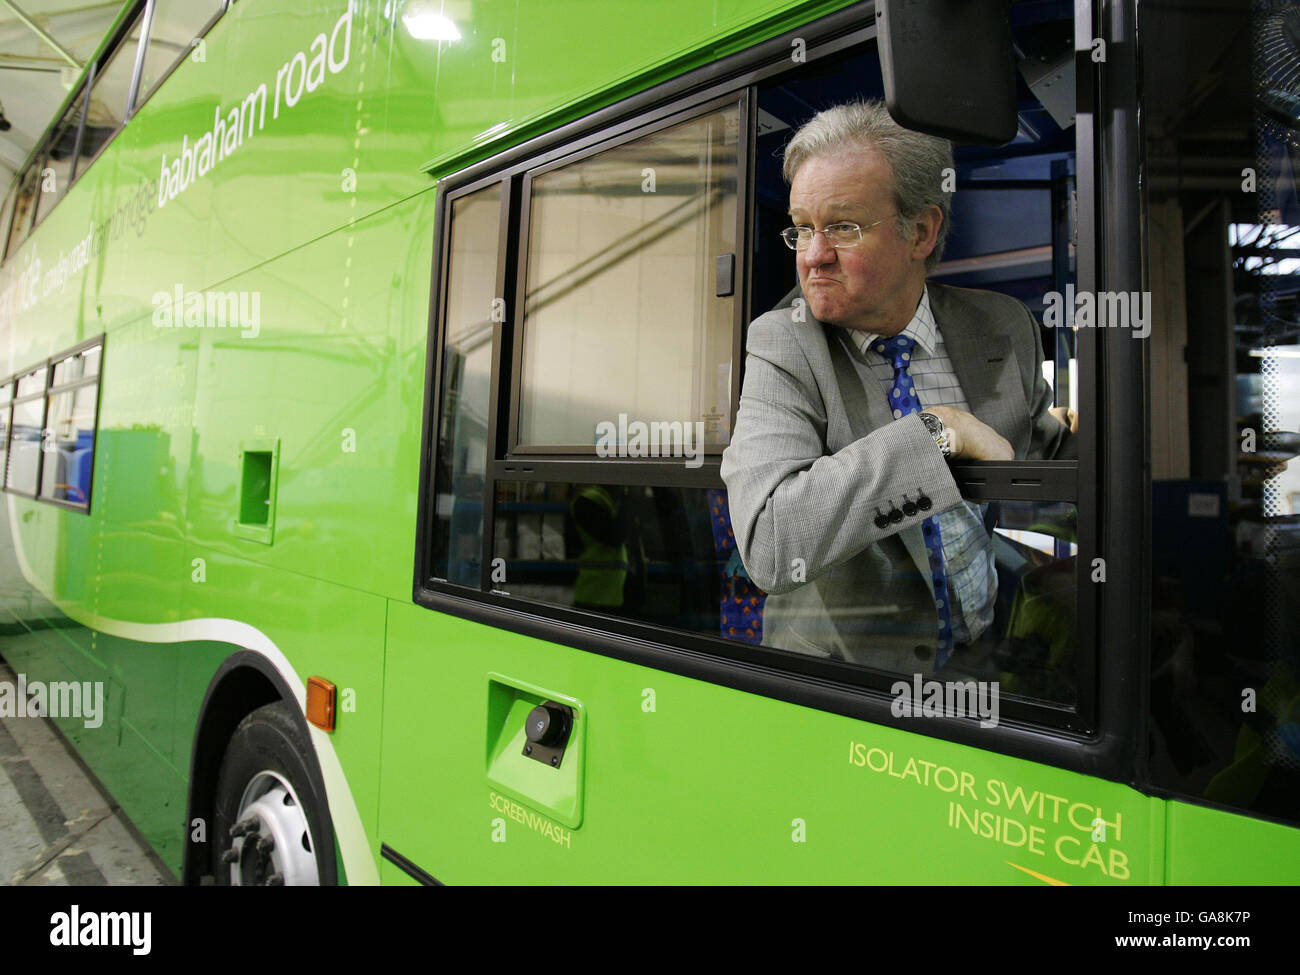 Firm bids to develop clean air bus Stock Photo